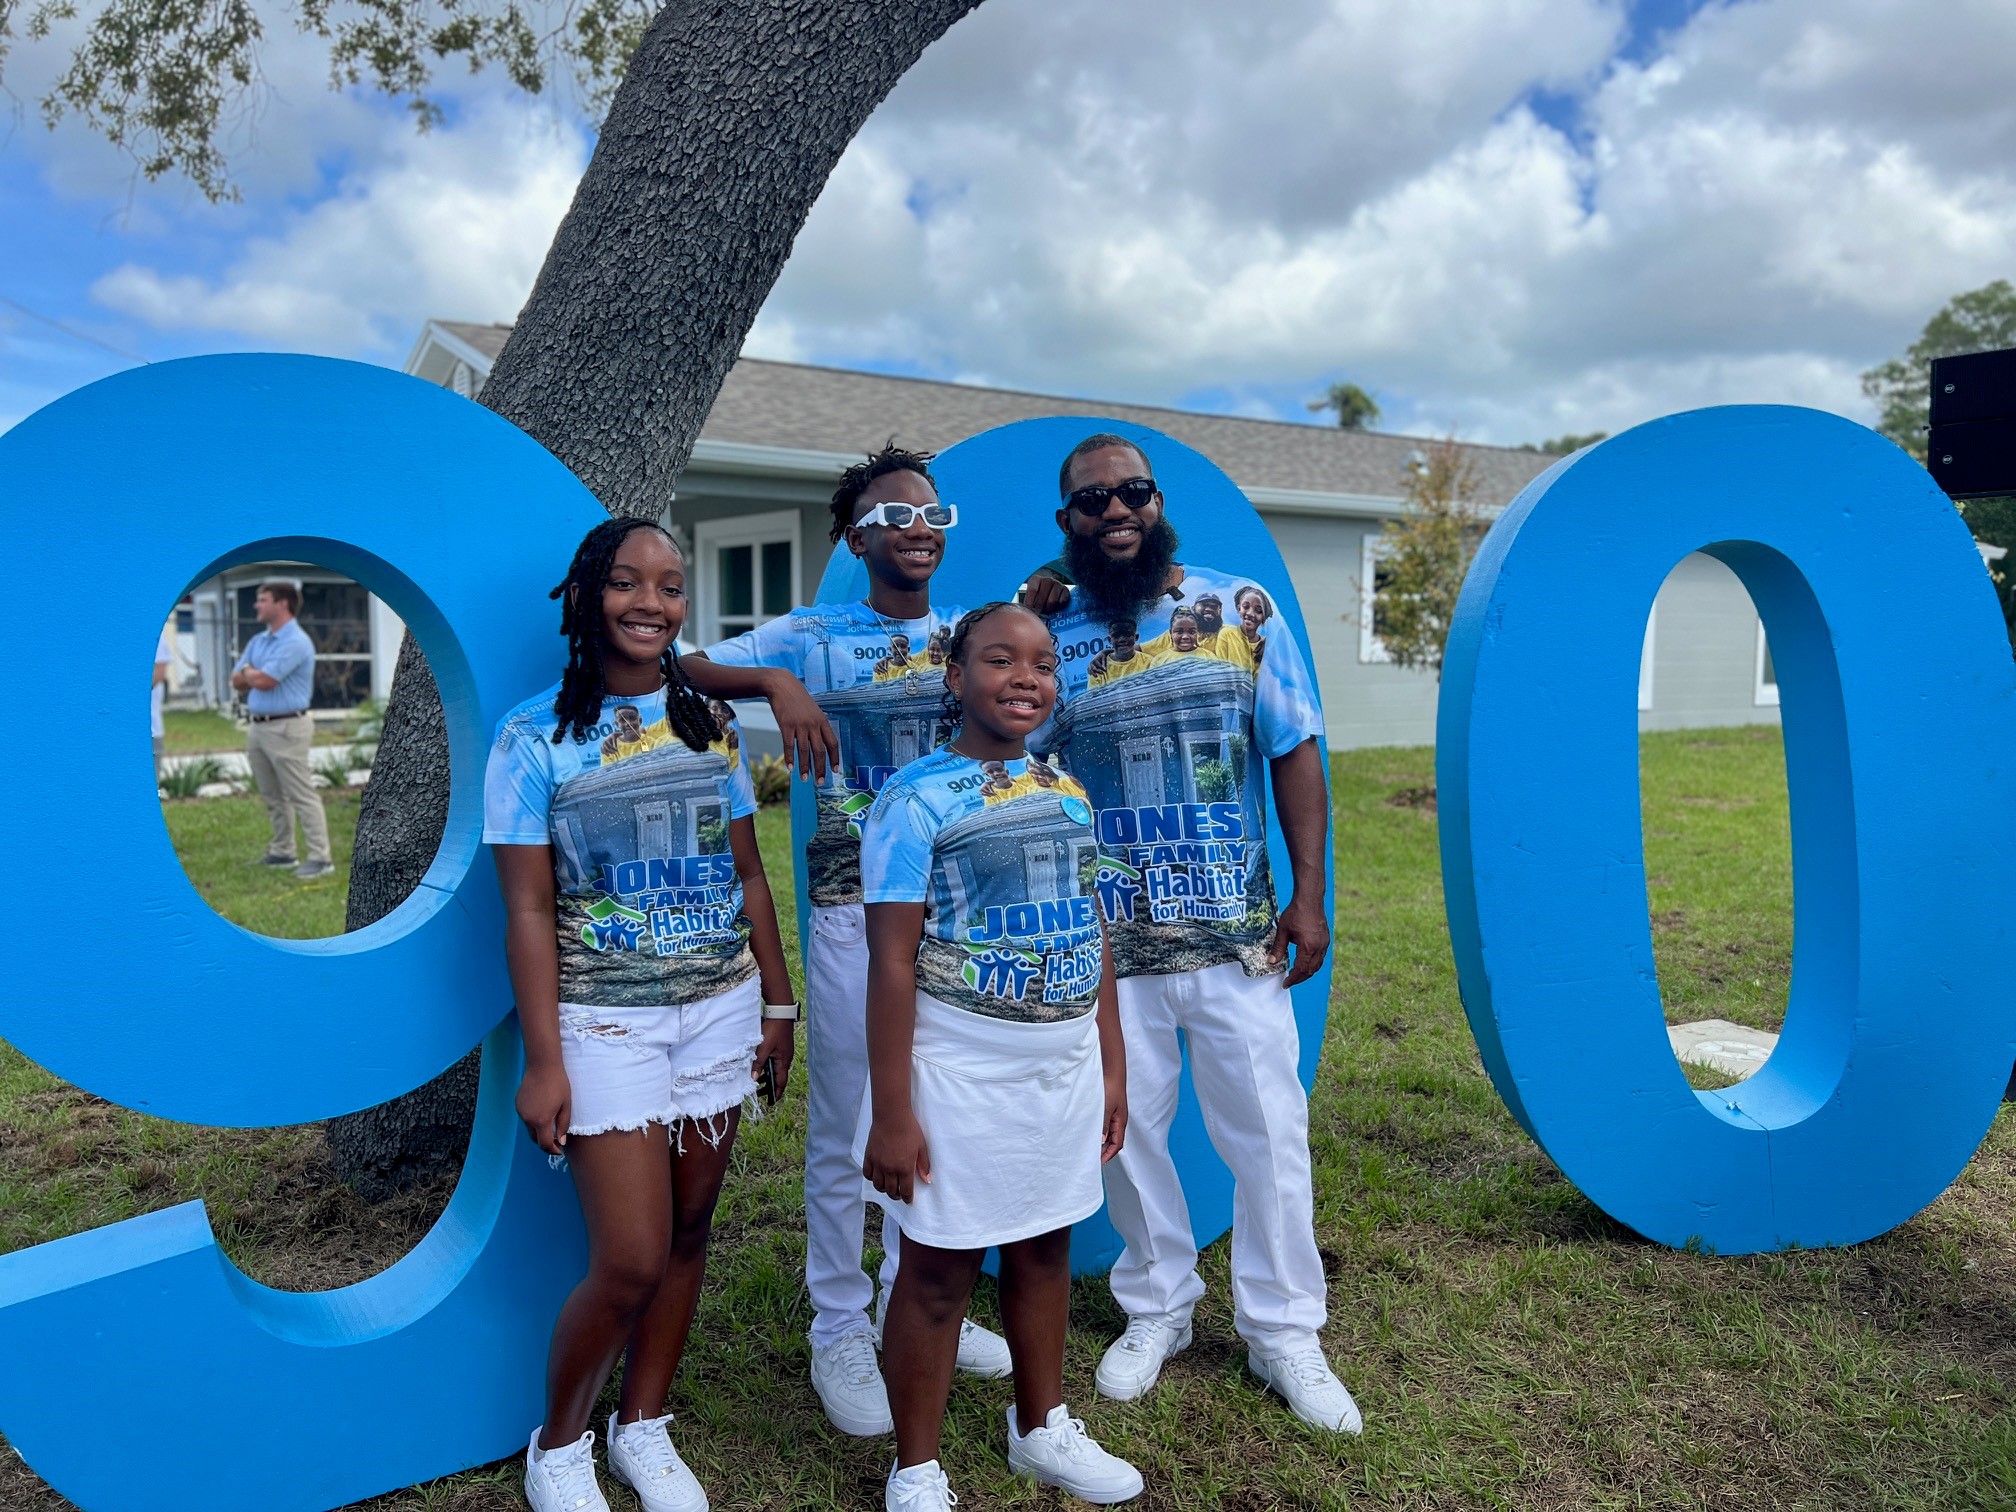 Bay News 9: Gooden family legacy continues with the 900th 'Habitat' home dedication in the Ridgecrest community